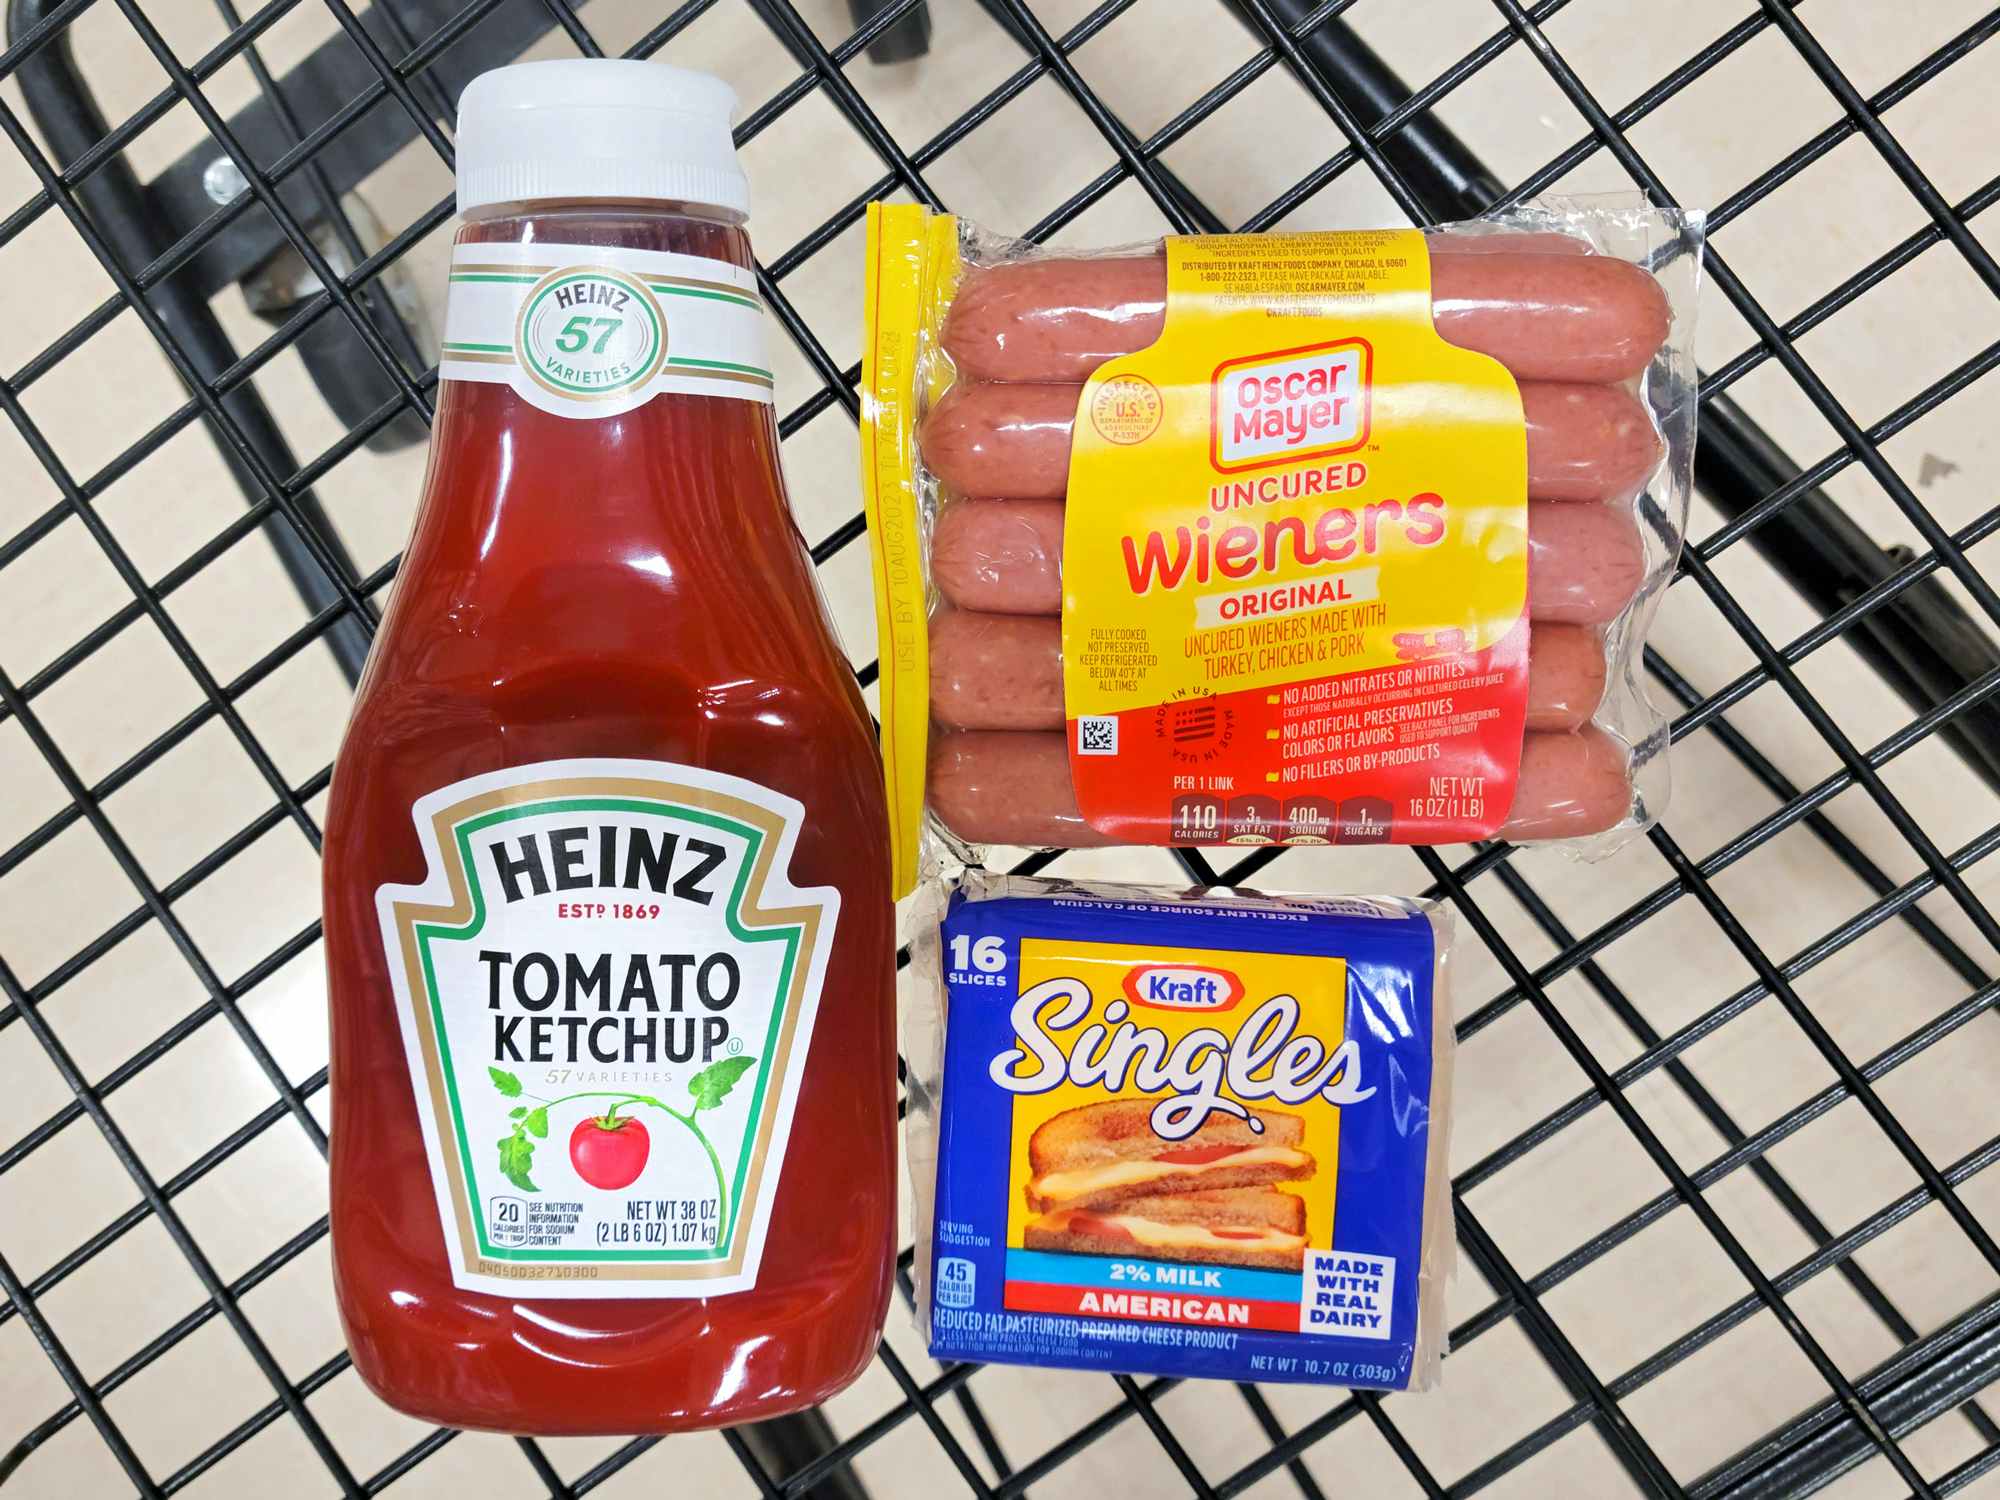 heinz tomato ketchup, oscar mayer weiners, and kraft singles in shopping cart